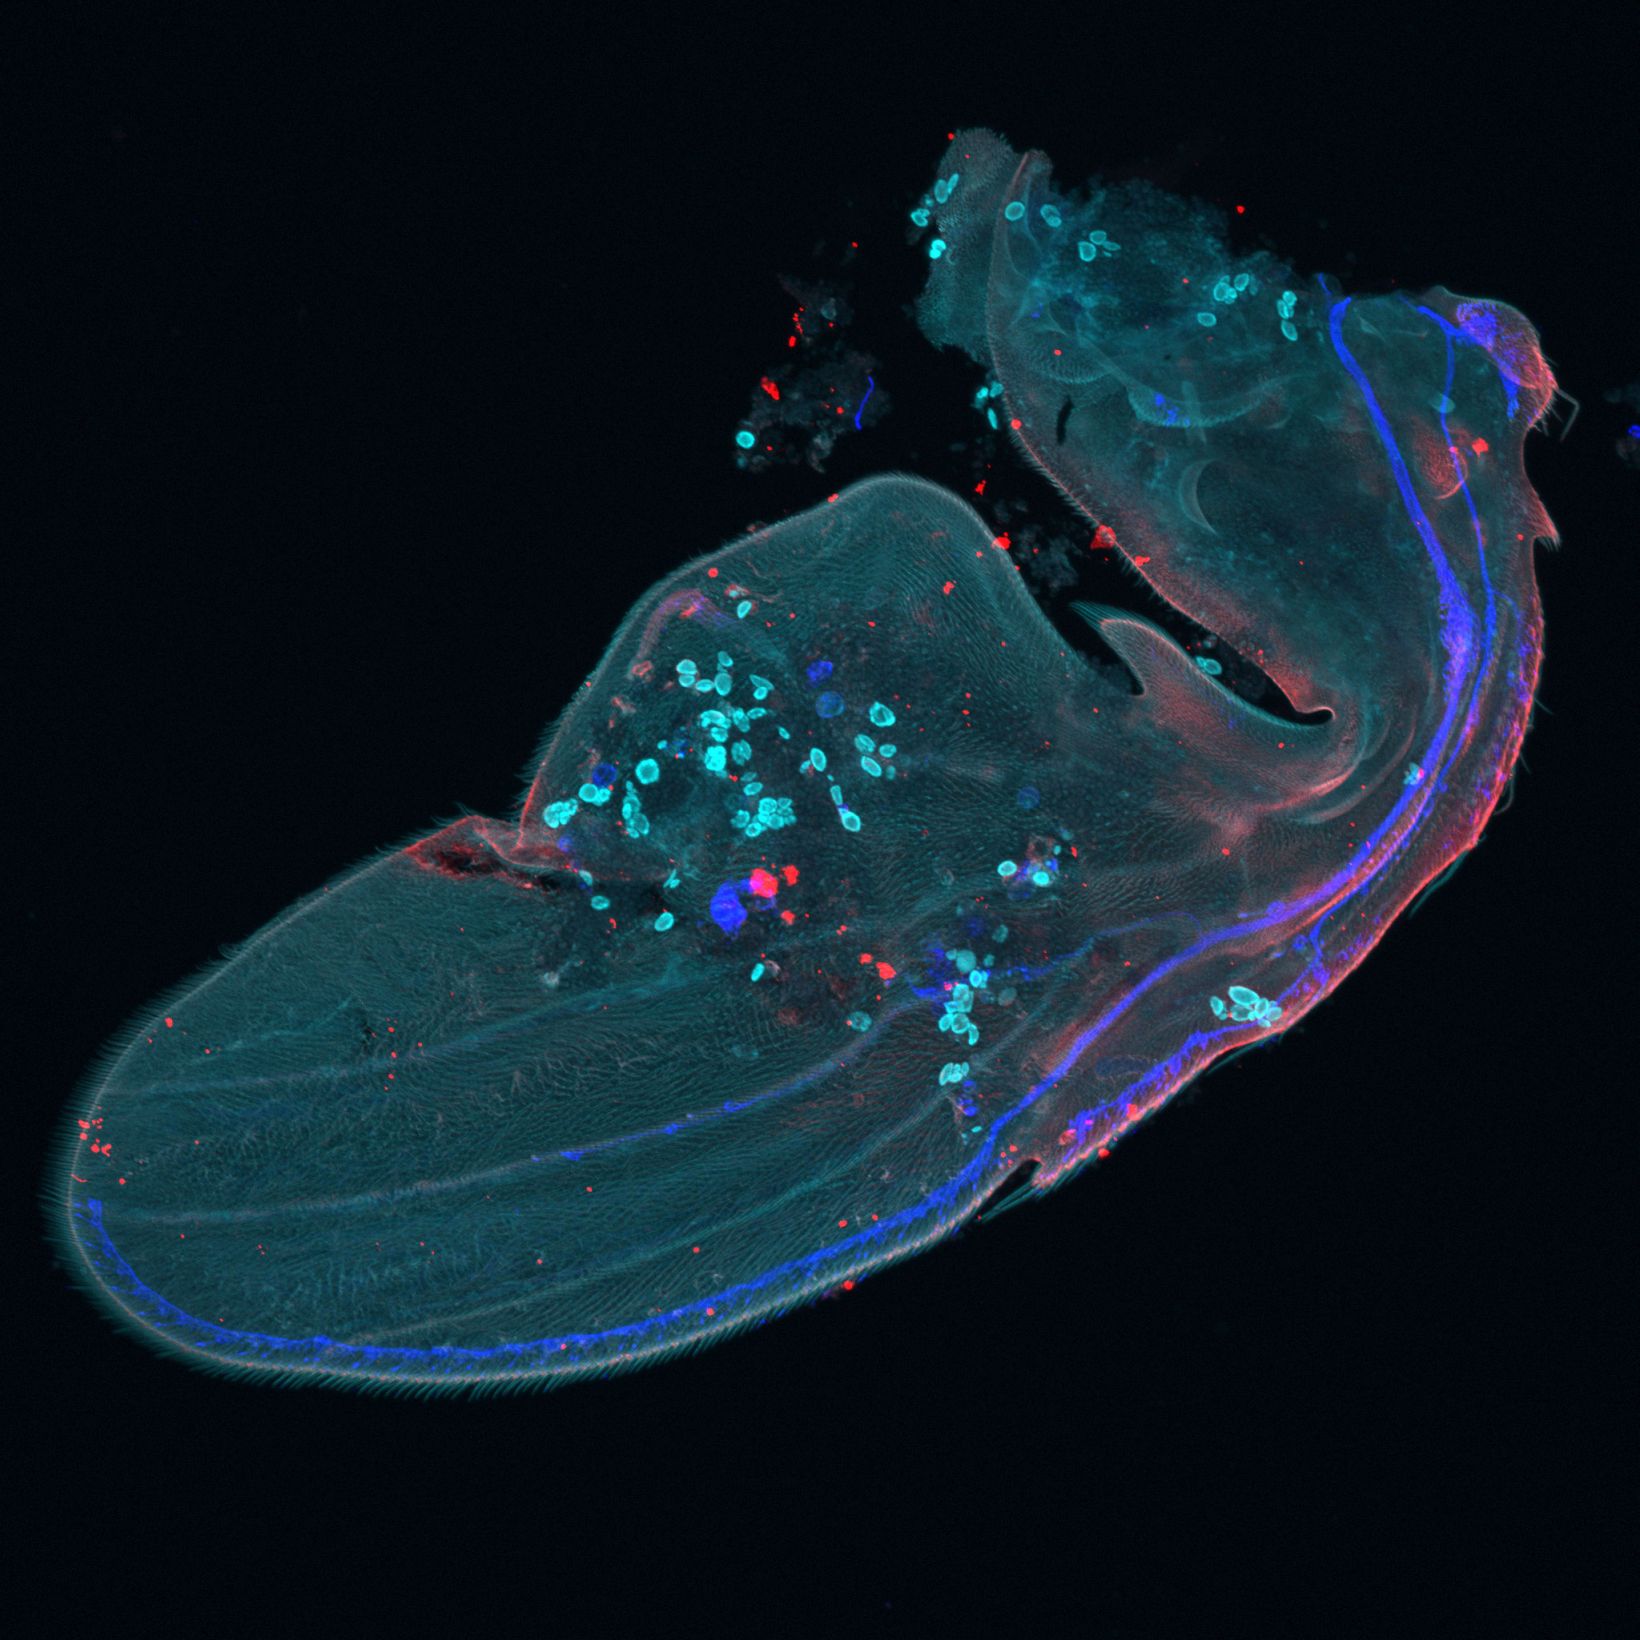 Overview image of a Drosophila wing